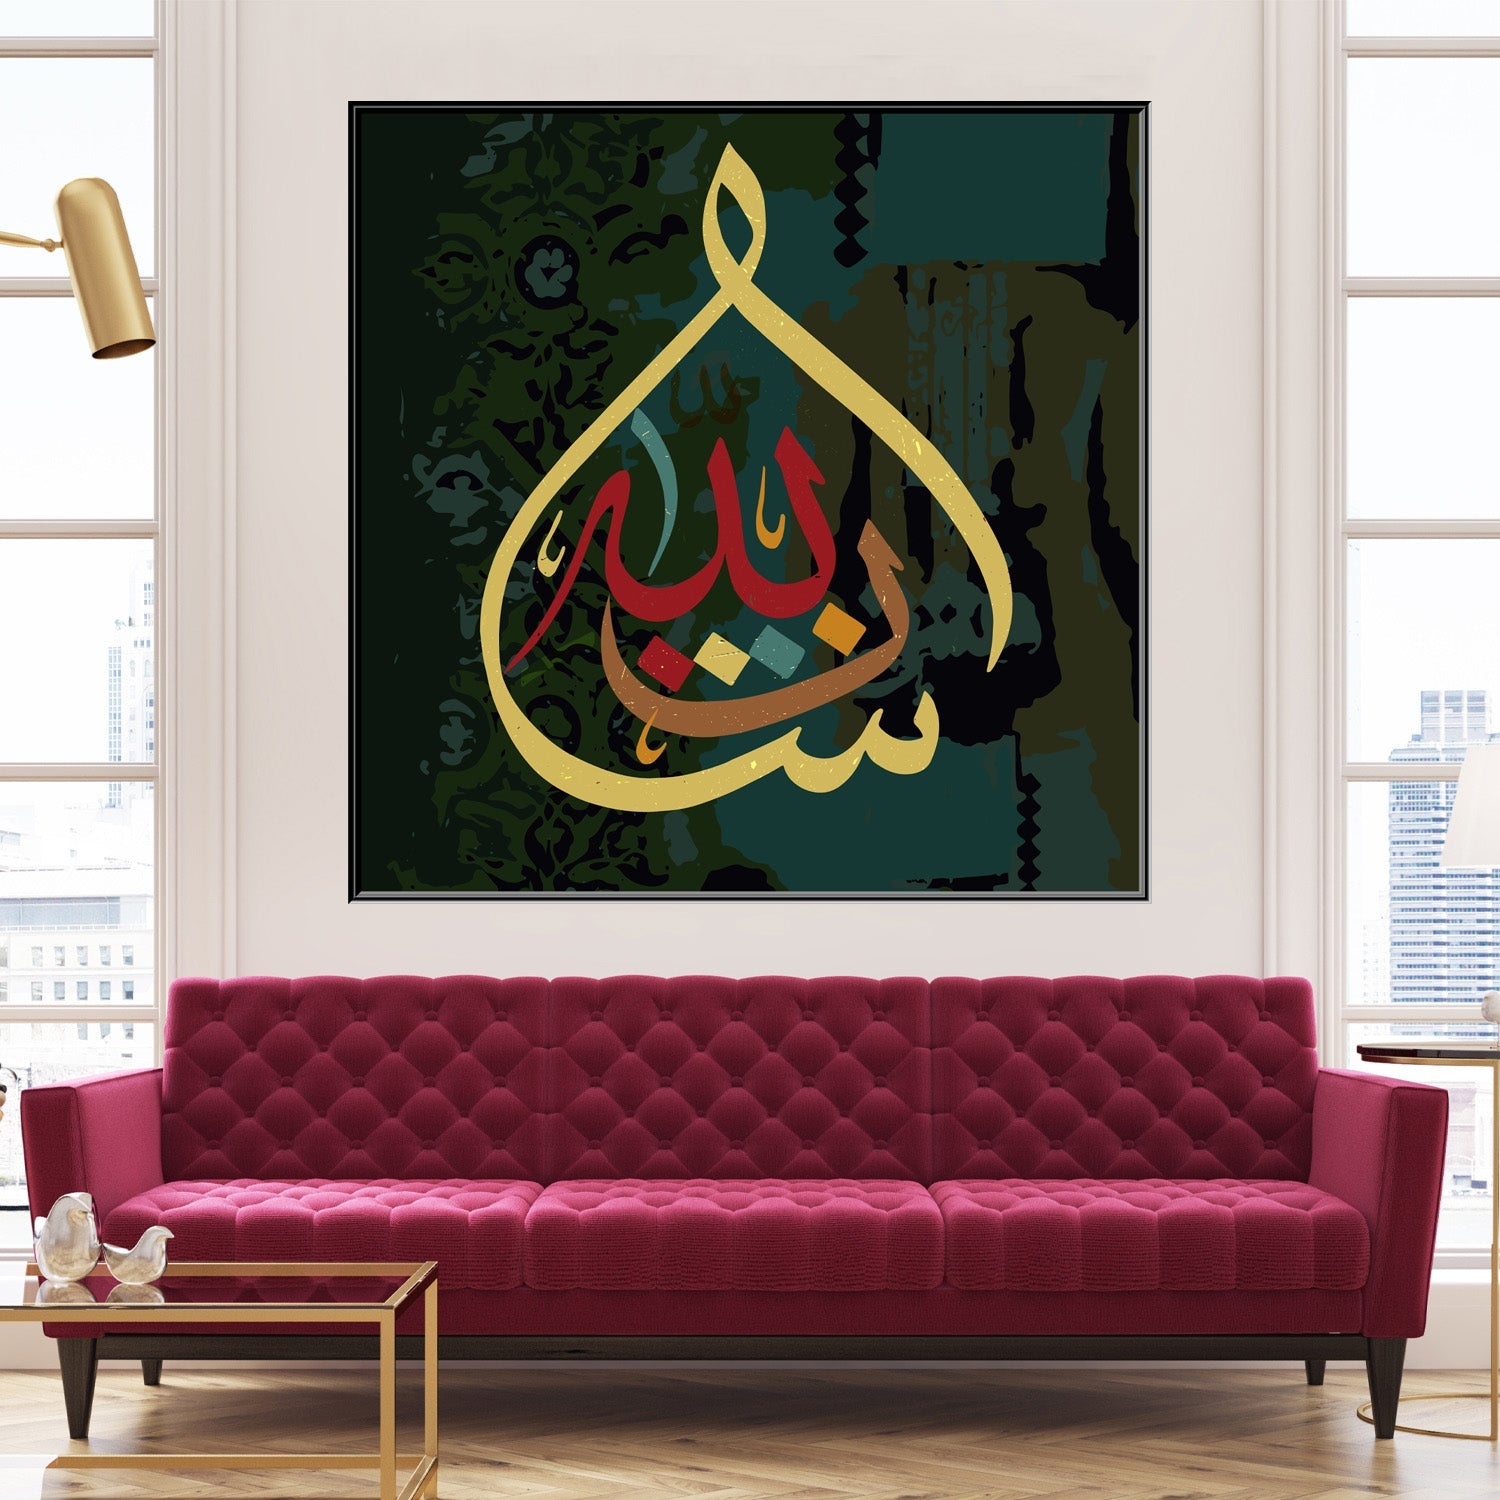 https://cdn.shopify.com/s/files/1/0387/9986/8044/products/MashaAllahCanvasArtprintStretched-4.jpg